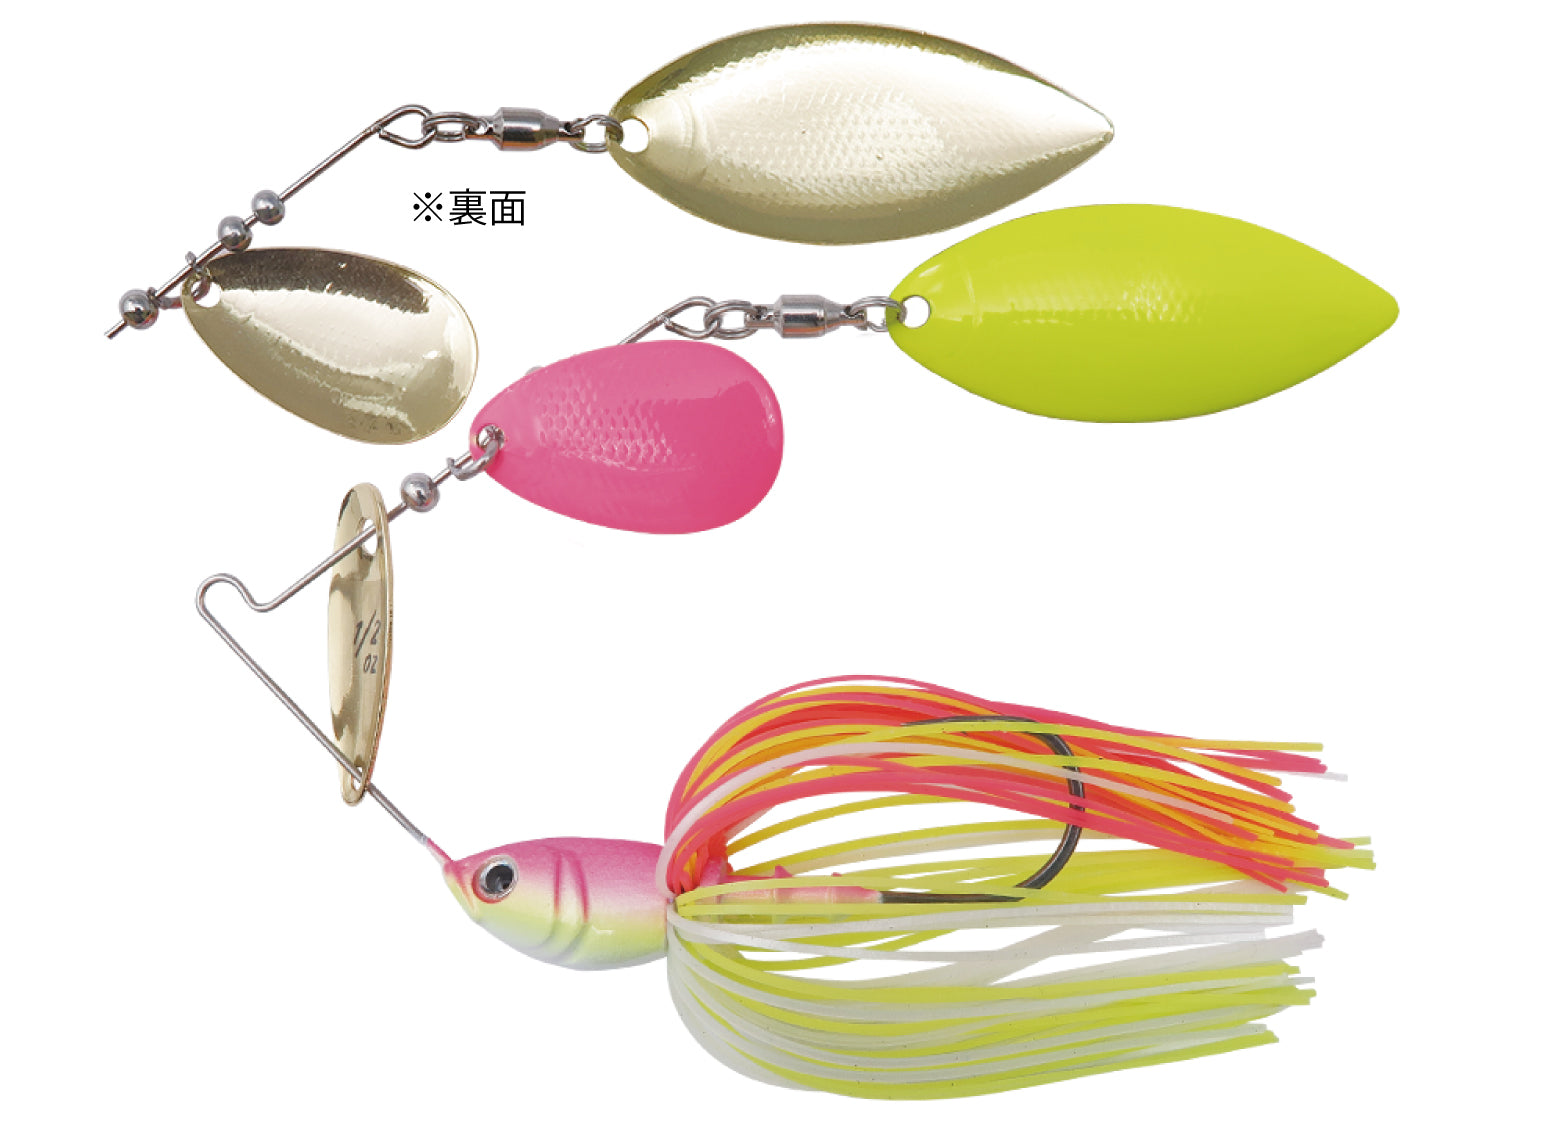 BottomUp Beeble 1/2 oz Double Willow DW Spinnerbait (Choose Colors